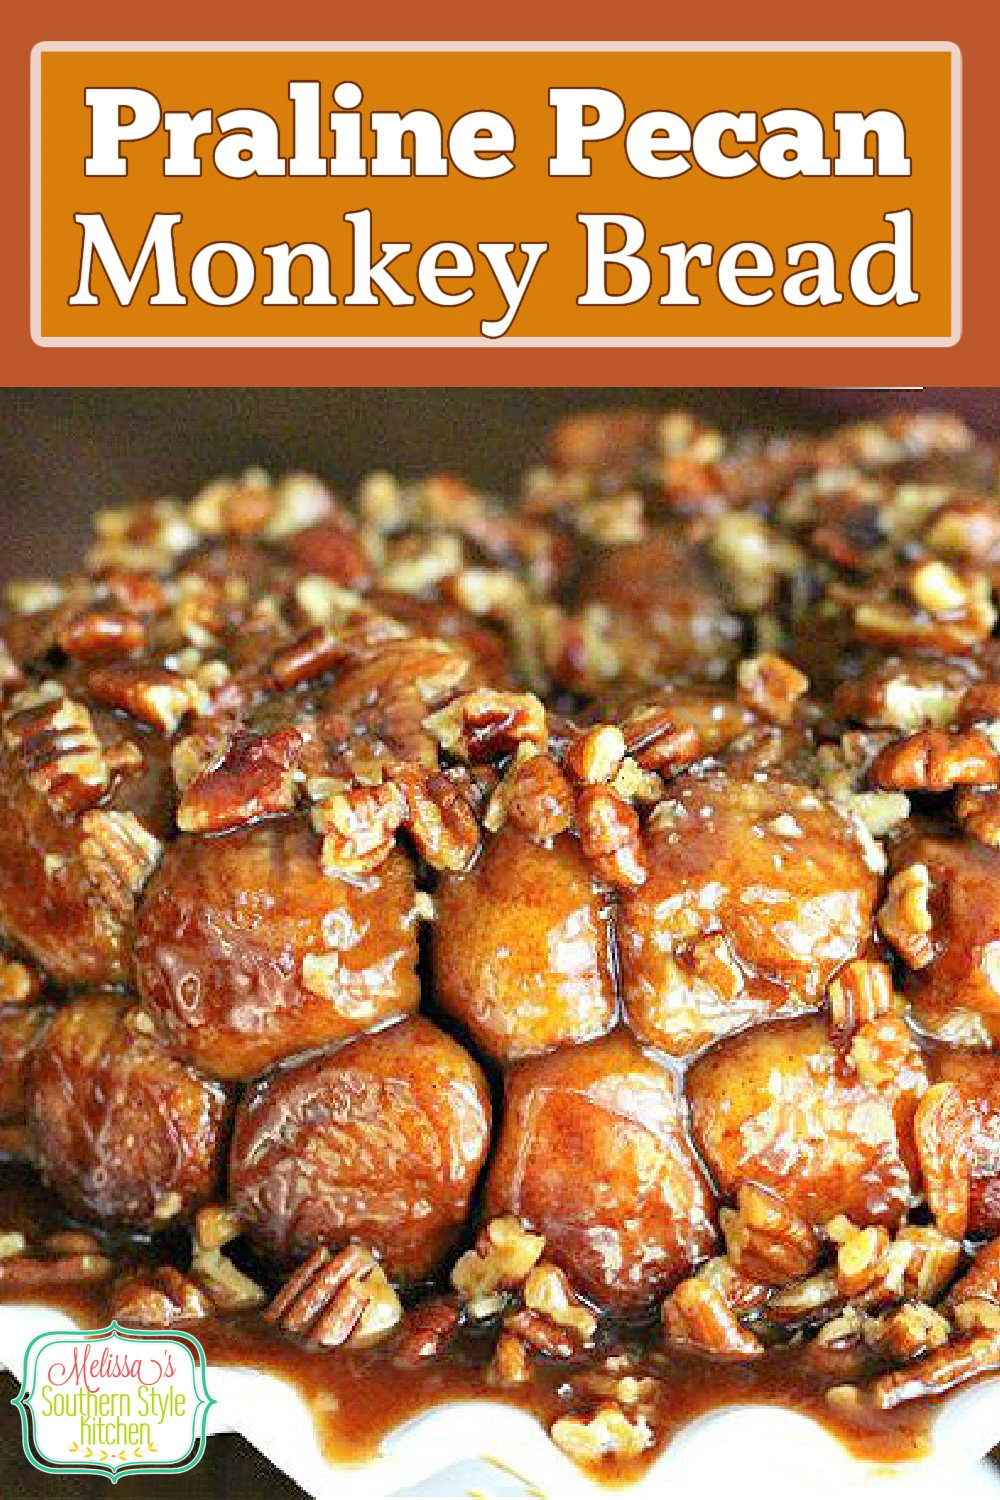 This ooey gooey Praline Pecan Monkey Bread will disappear in no time flat #monkeybread #pralines #pralinepecan #monkeybreadrecipes #bread #sweetbreads #appetizers #partyfood #footballfood #pecans #bestevermonkeybread #dinnerrolls #southernrecipes #southernfood #desserts #dessertfoodrecipes via @melissasssk